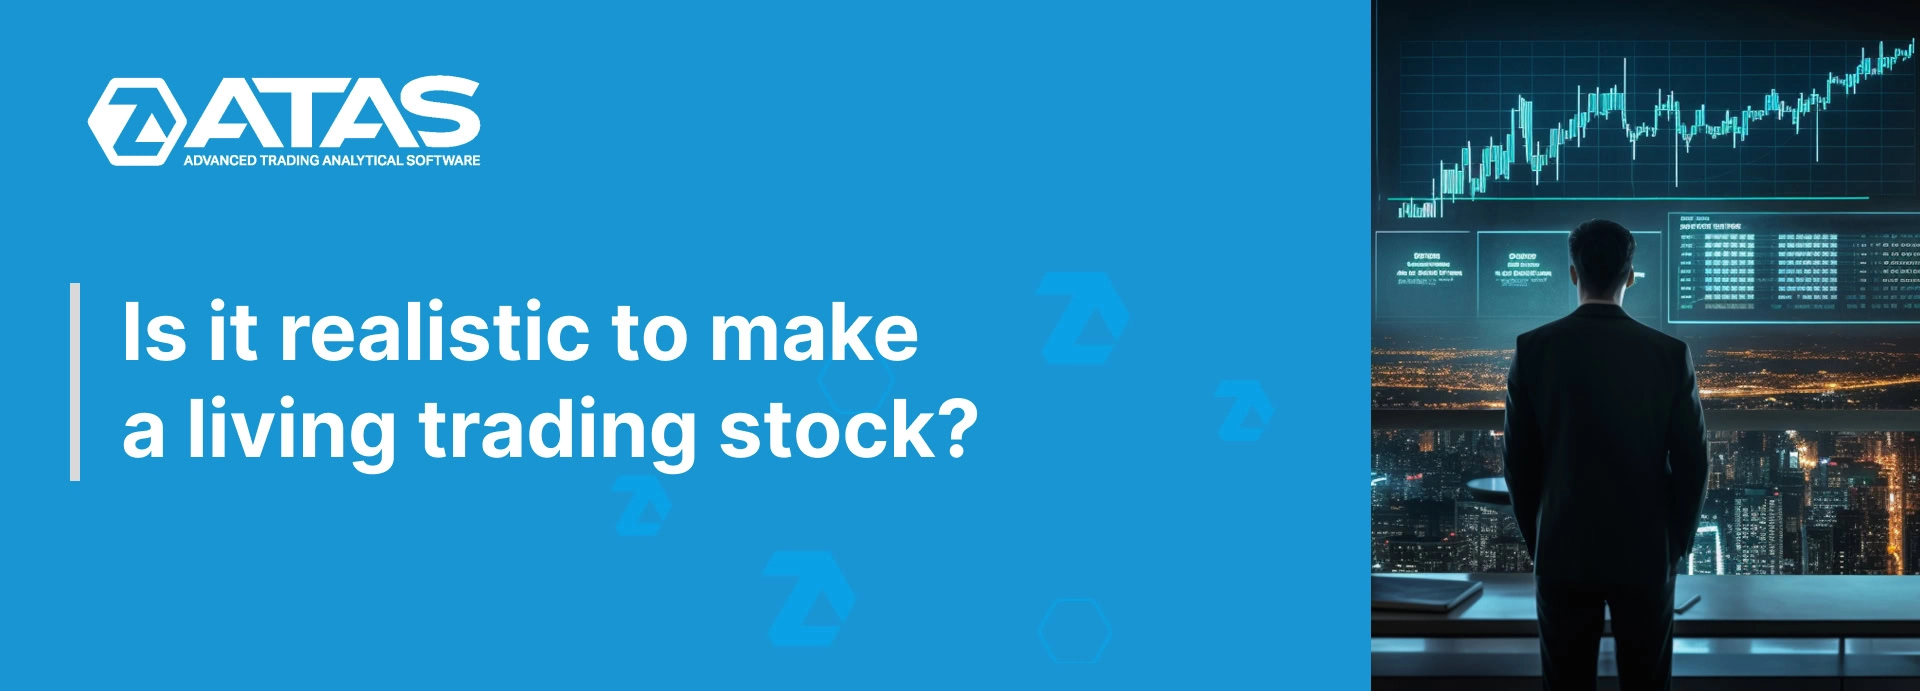 Is it realistic to make a living trading stock